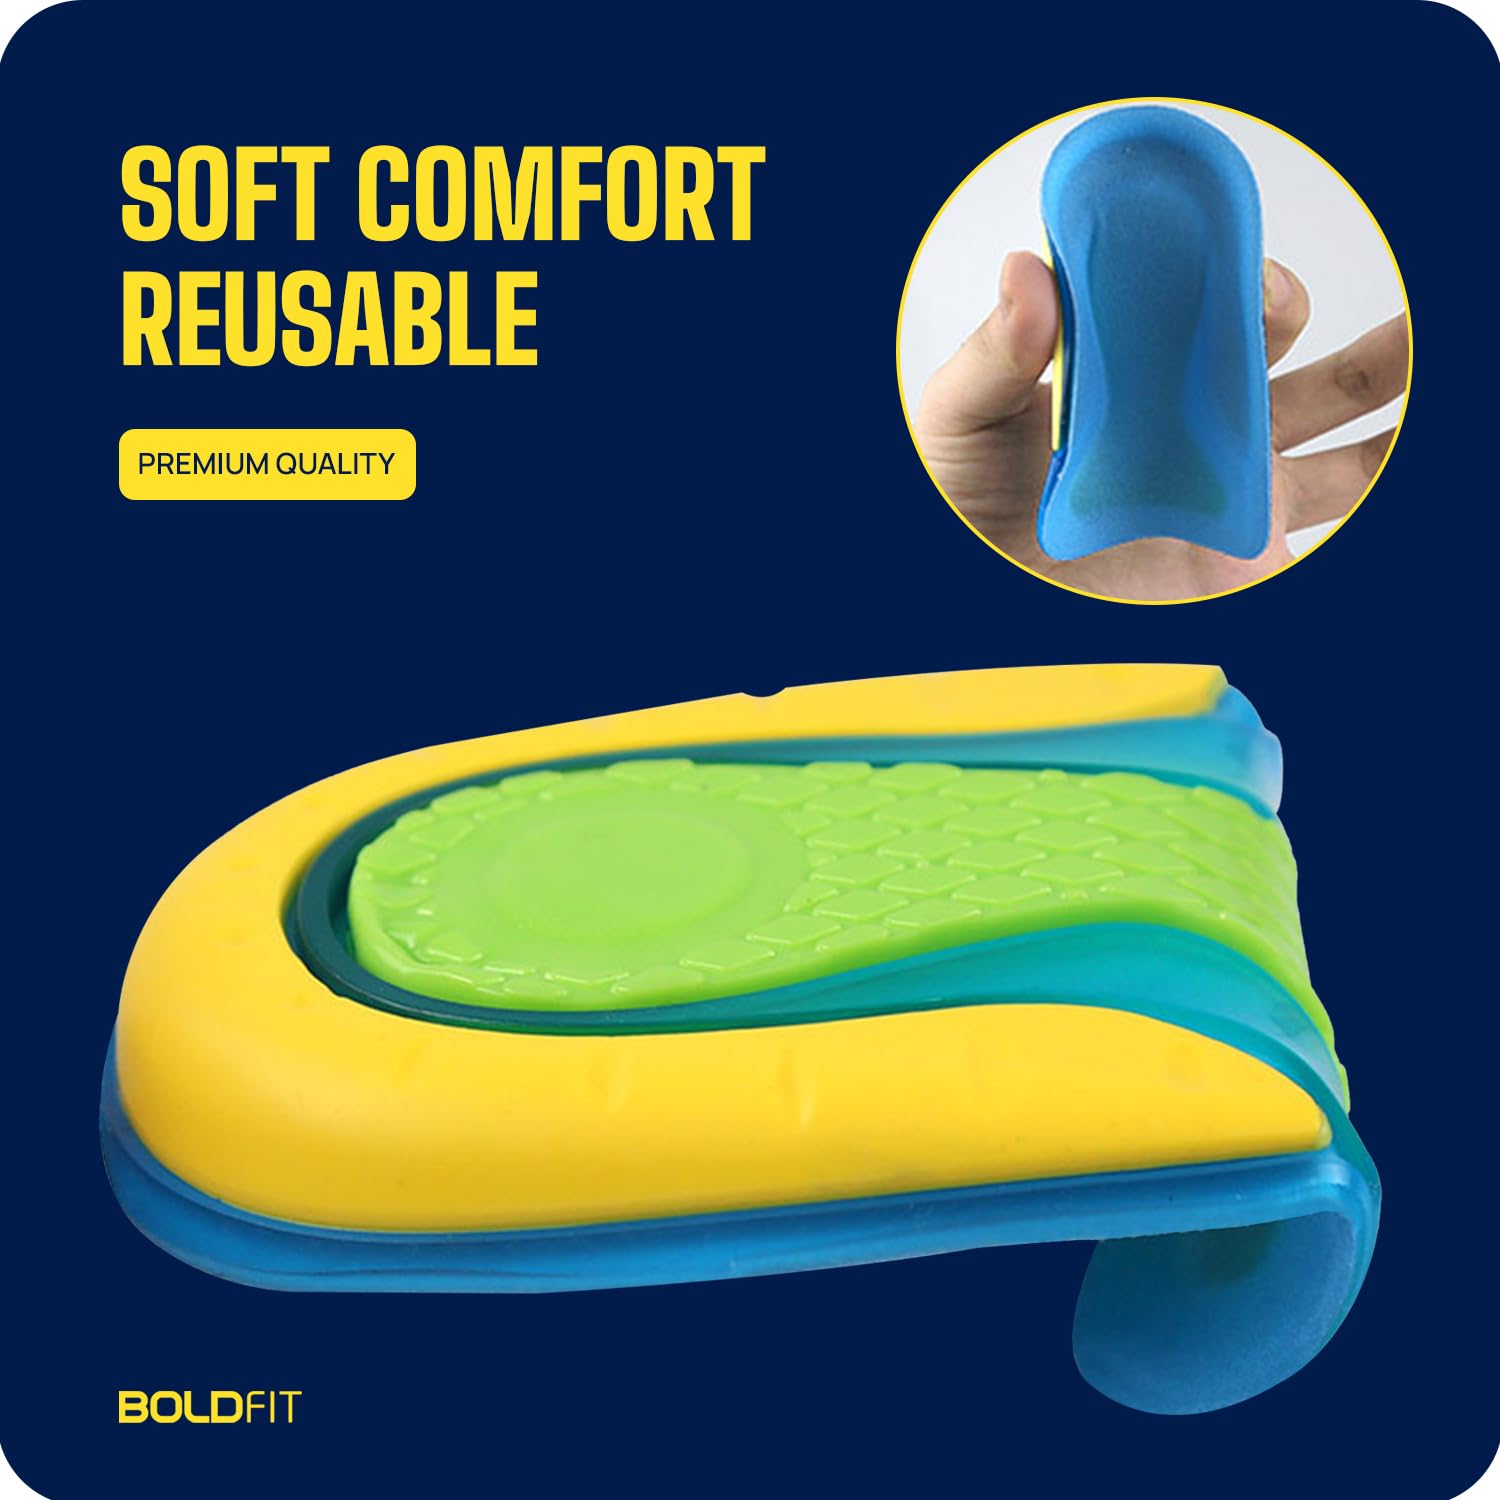 Arch & Heel Support For Pain Relief